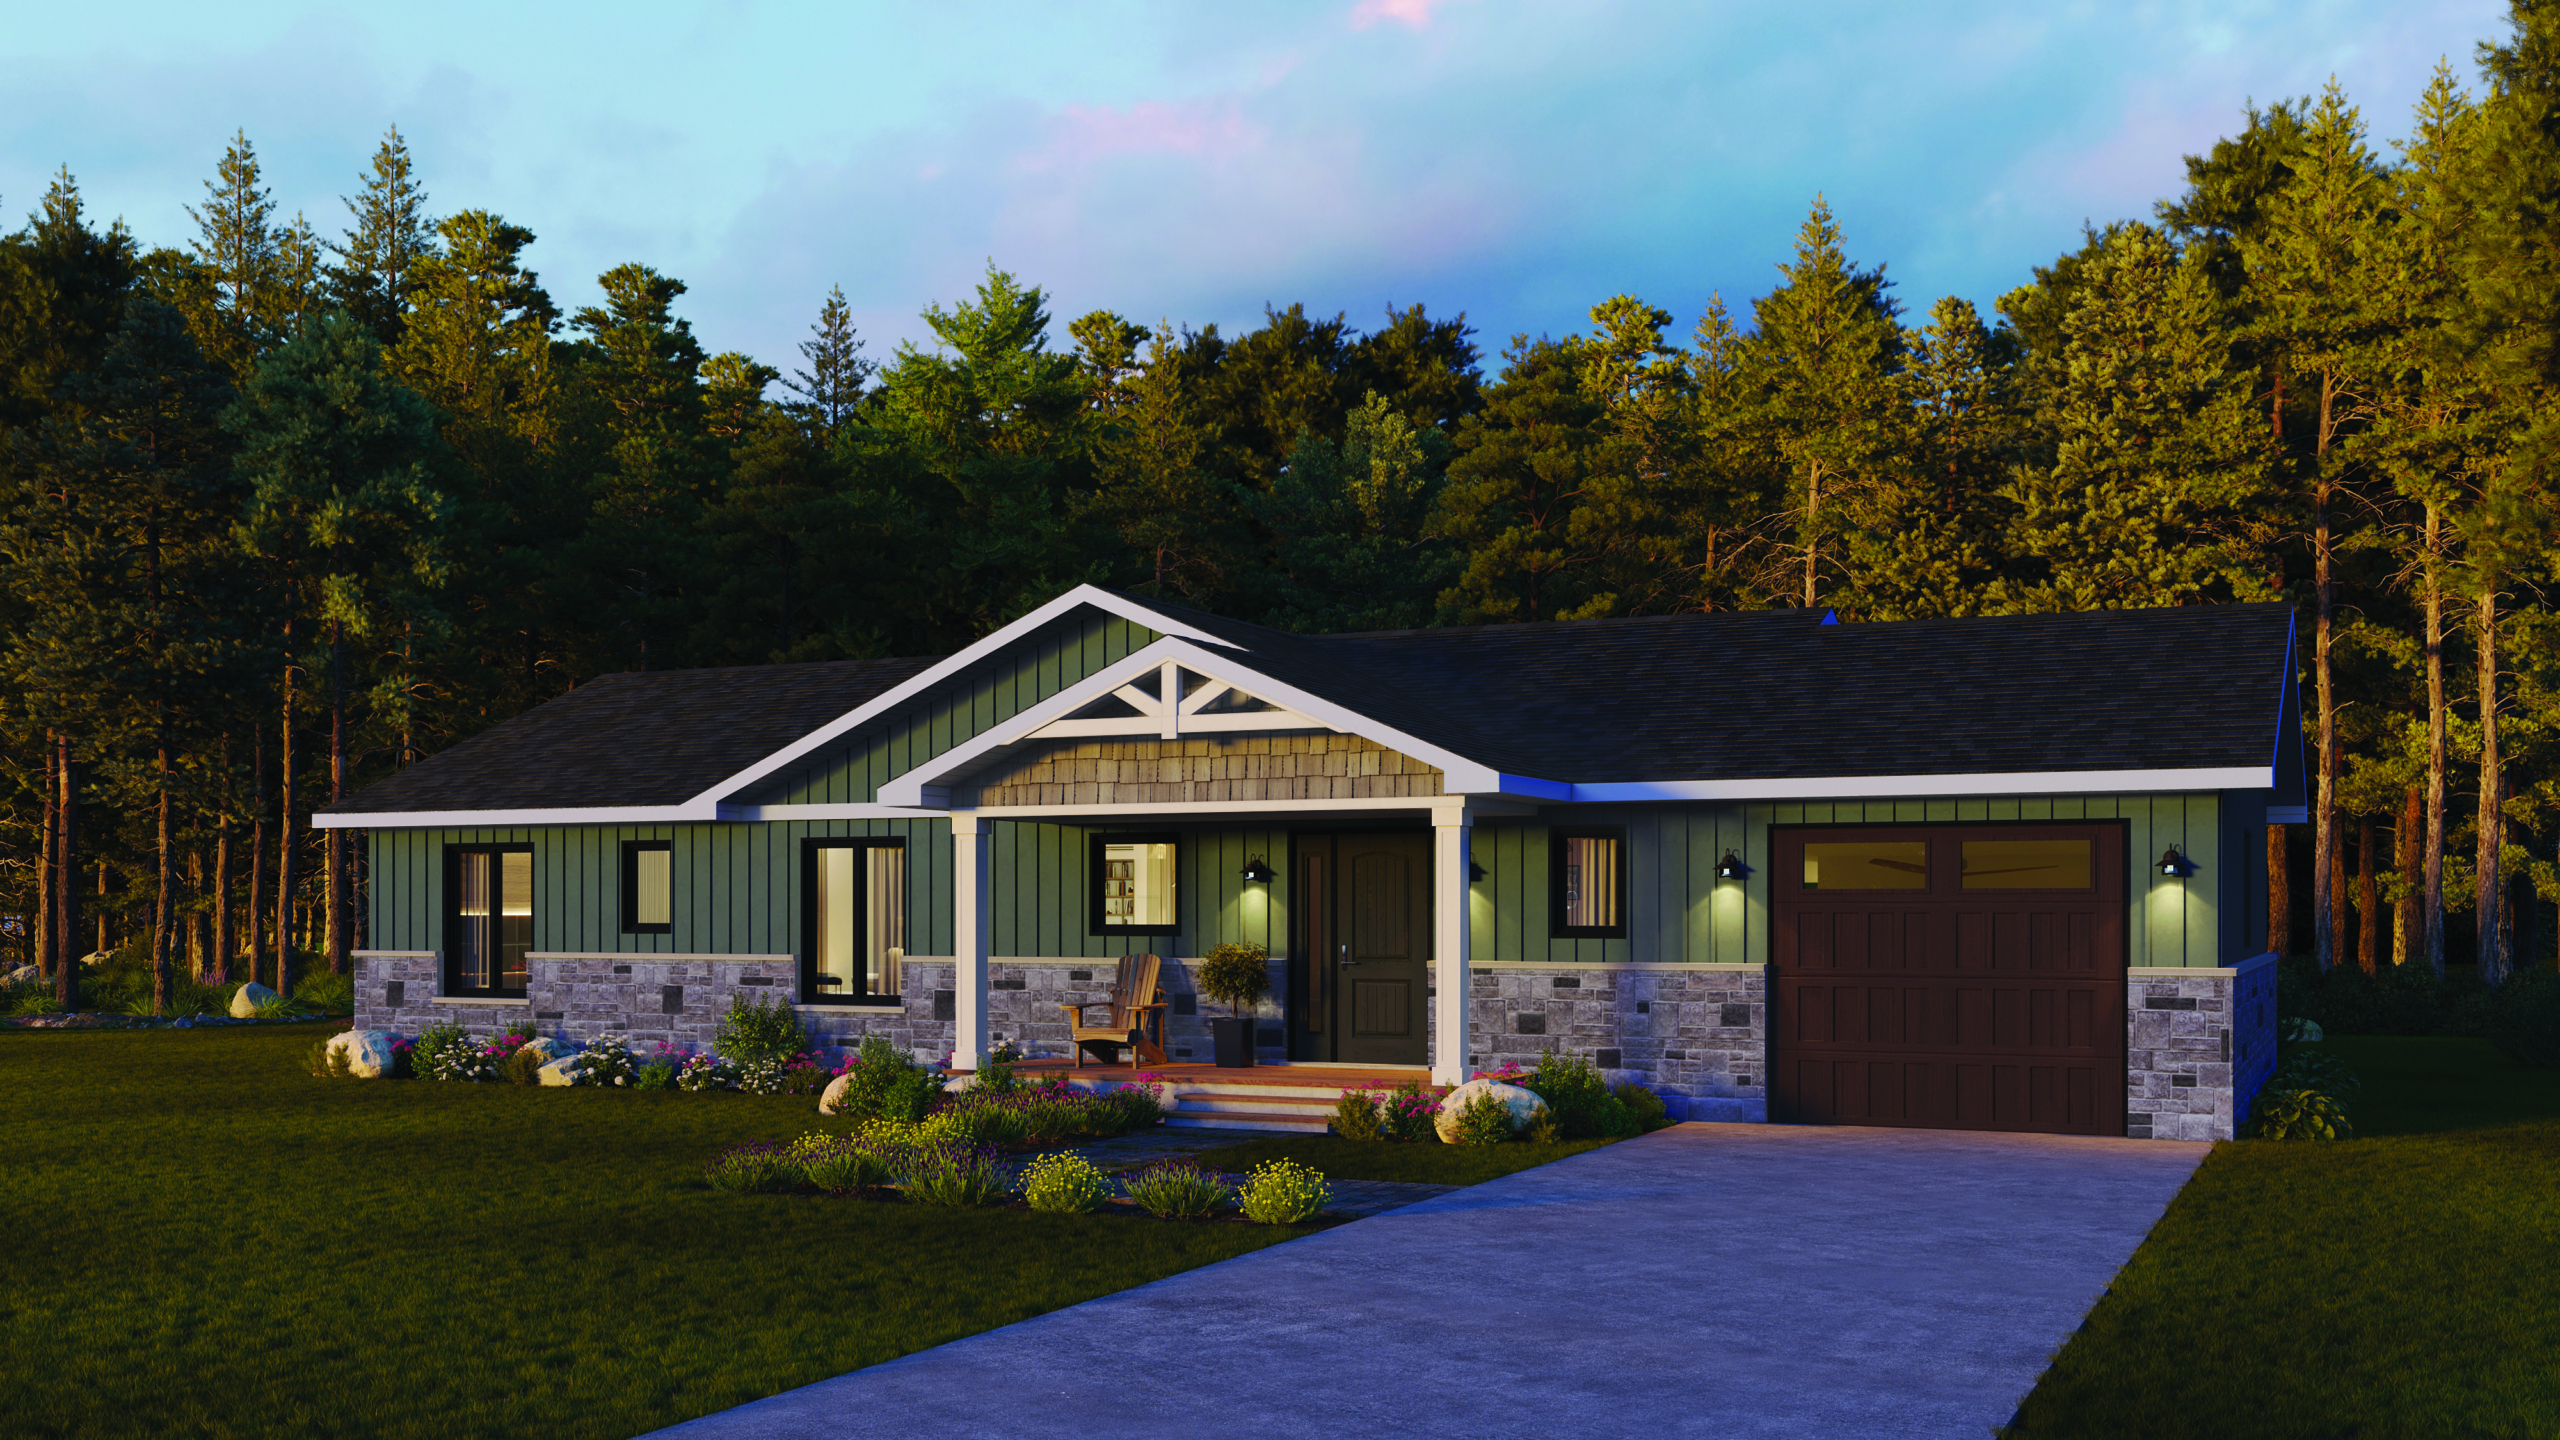 Lakefield model home rendering, front of house. From Quality Homes.